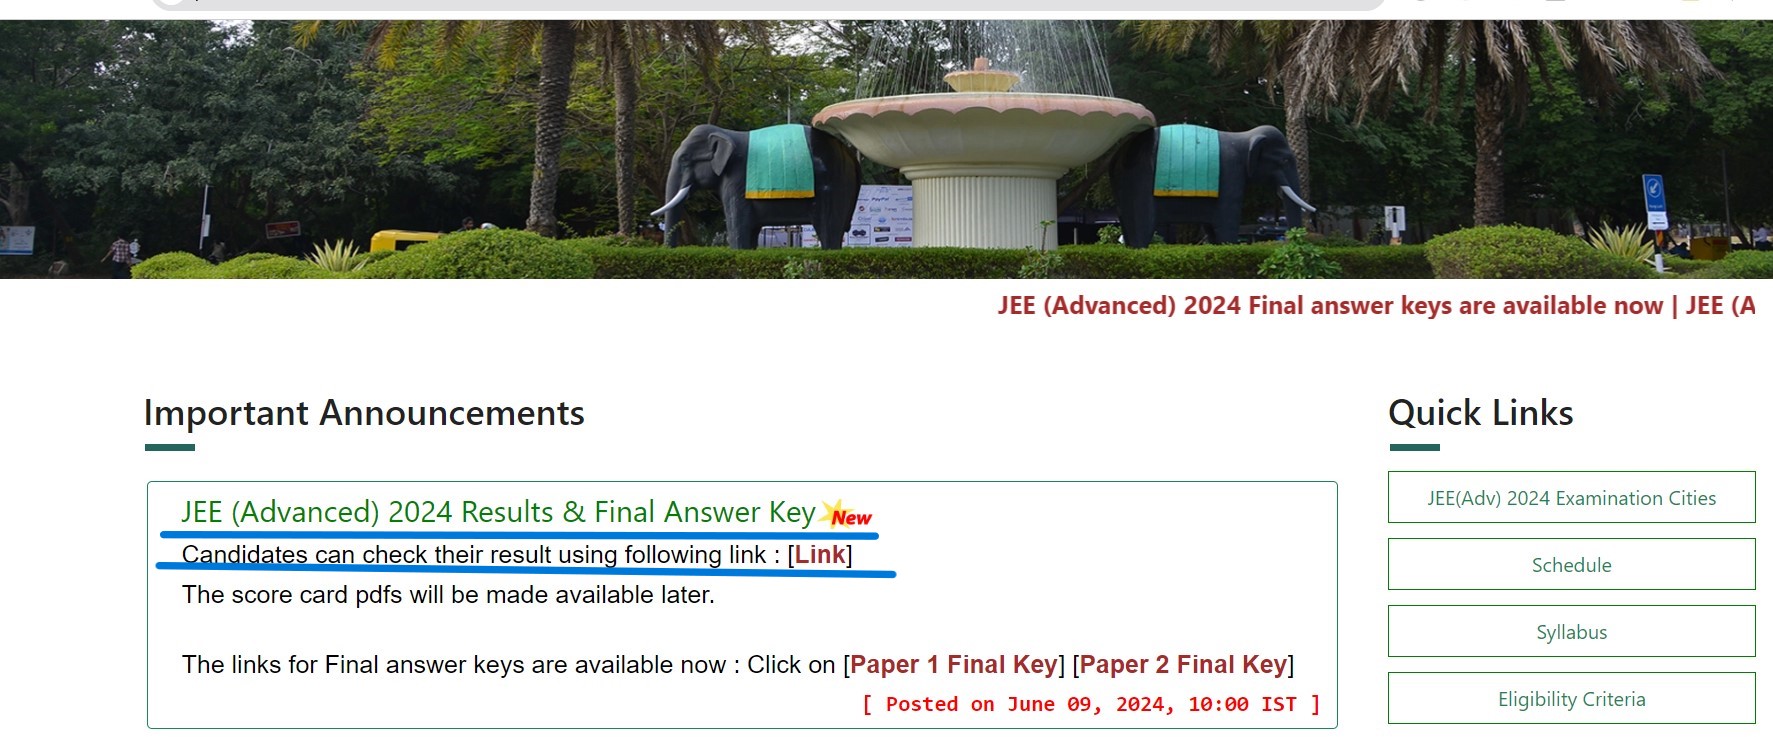 how to check jee advanced 2024 result